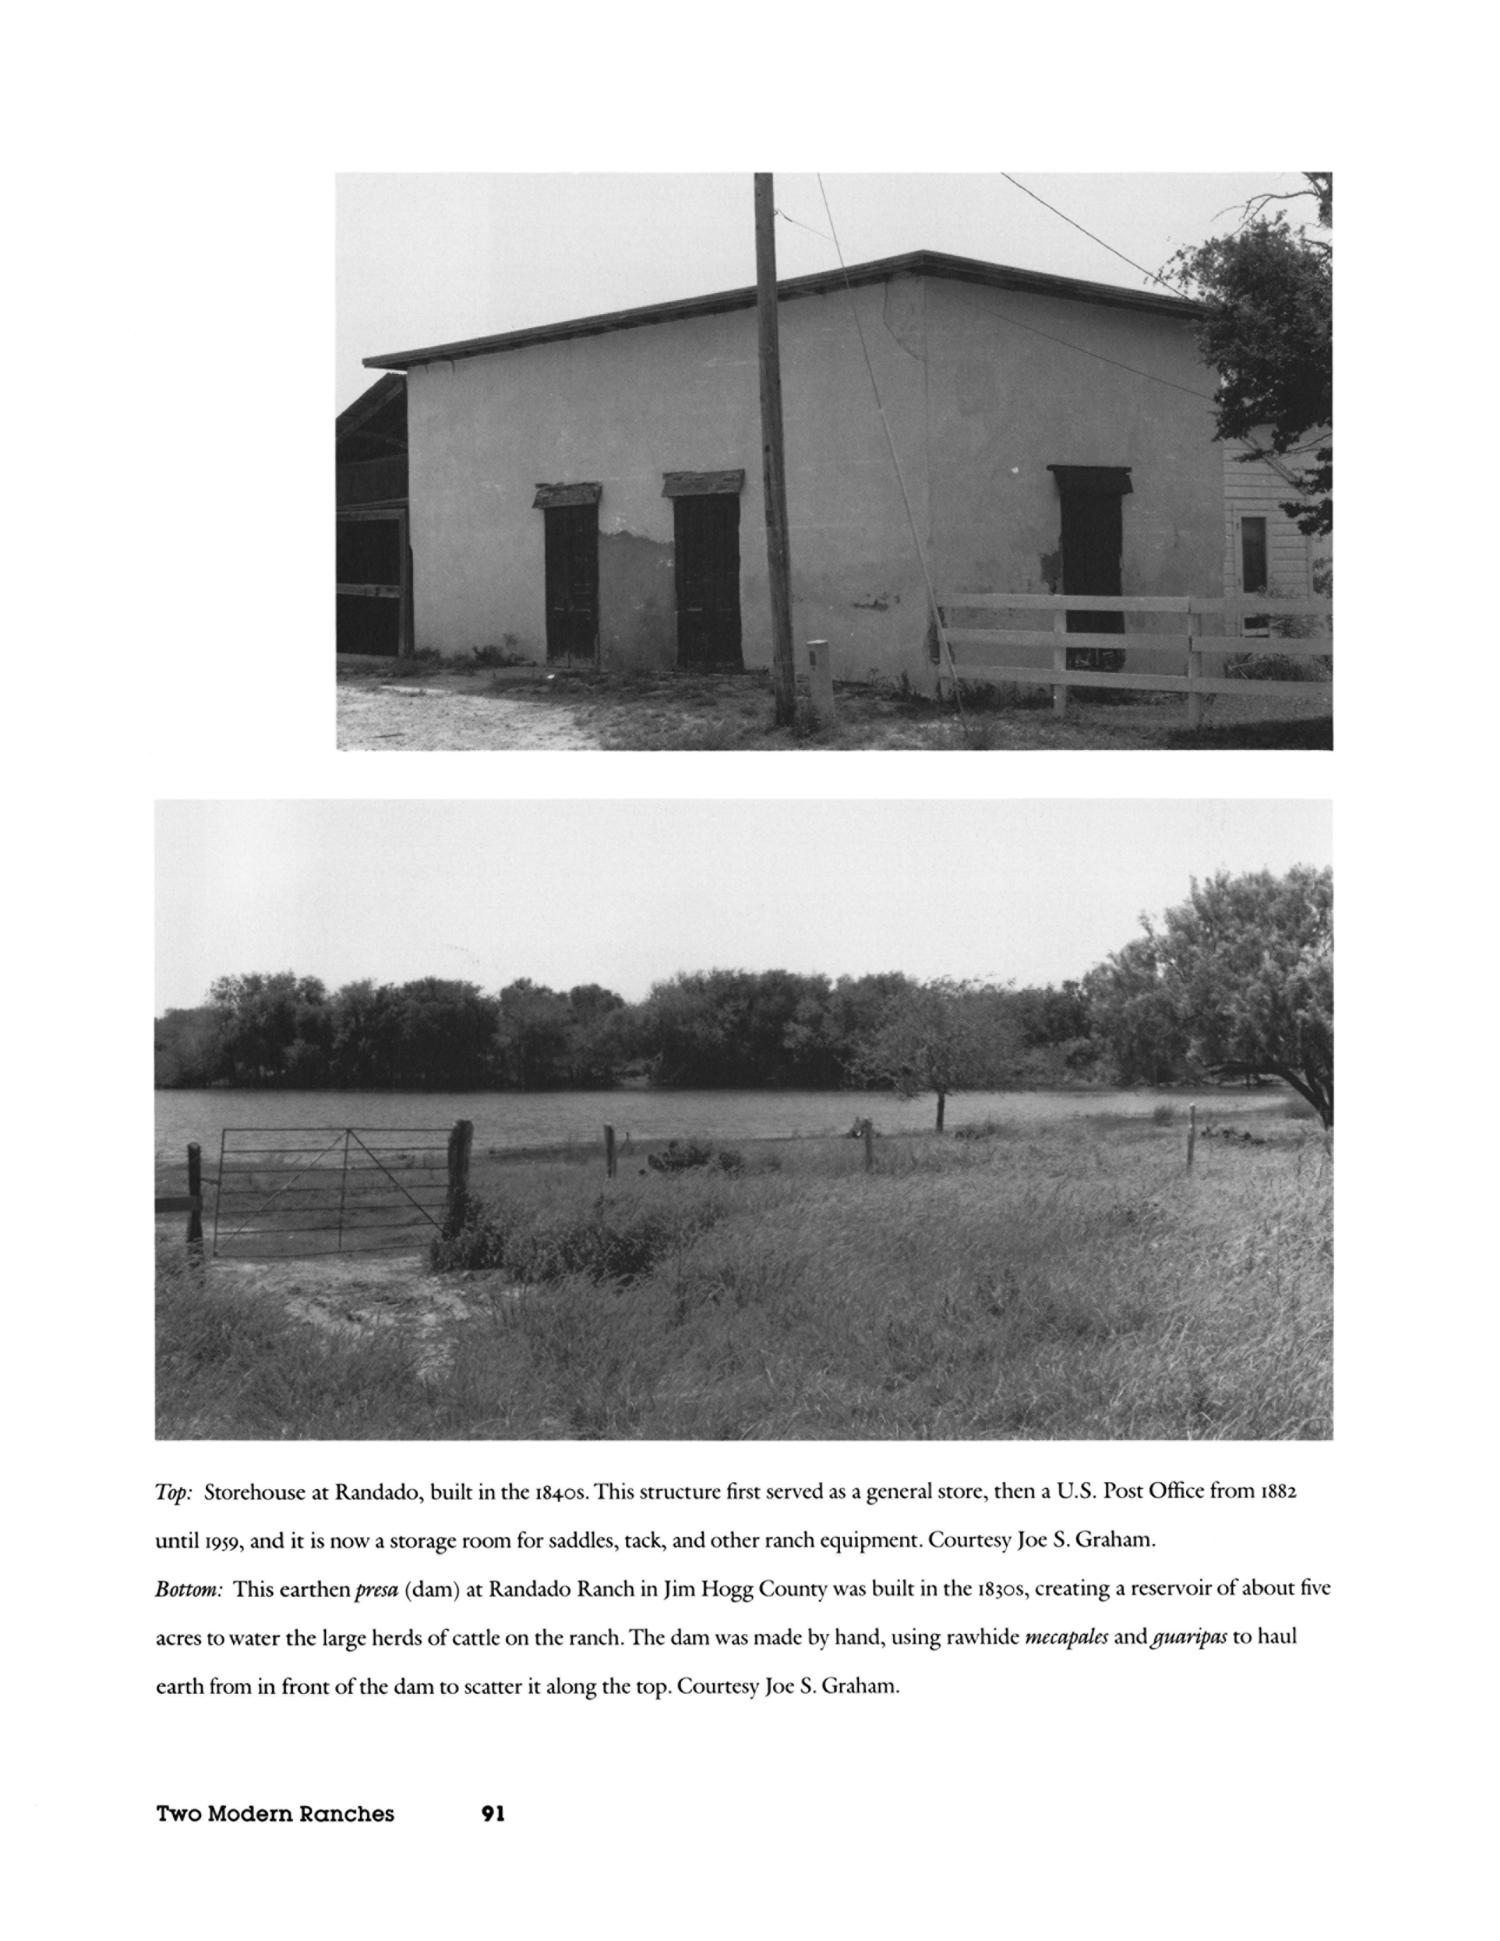 El Rancho in South Texas: Continuity and Change From 1750
                                                
                                                    91
                                                